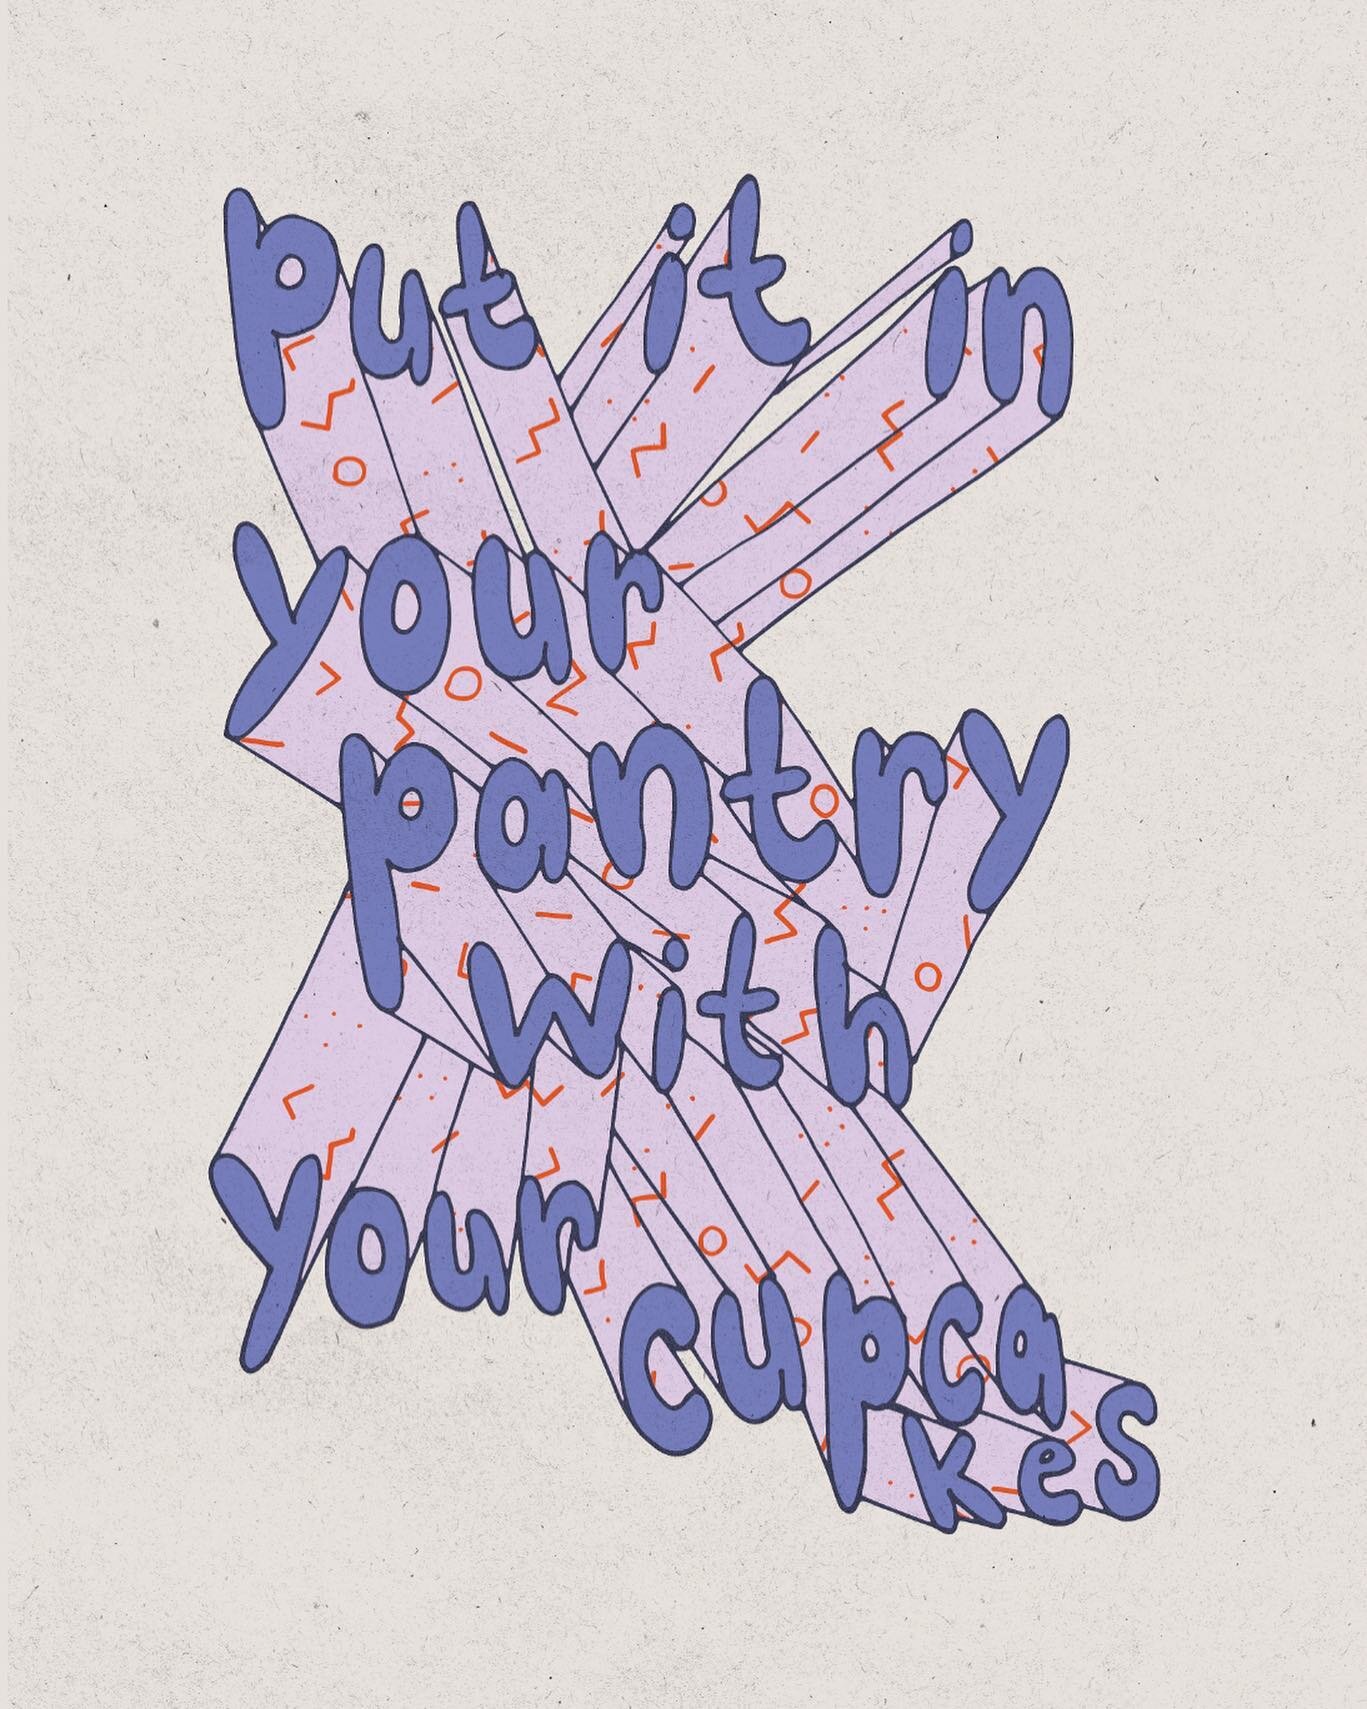 Here&rsquo;s a playful Simon and Garfunkel lyric to start off your Monday.
From Mrs. Robinson, released in 1968, and created for the movie, The Graduate.
-
[image of illustrated bubble letters spelling out &ldquo;put it in your pantry with your cupca